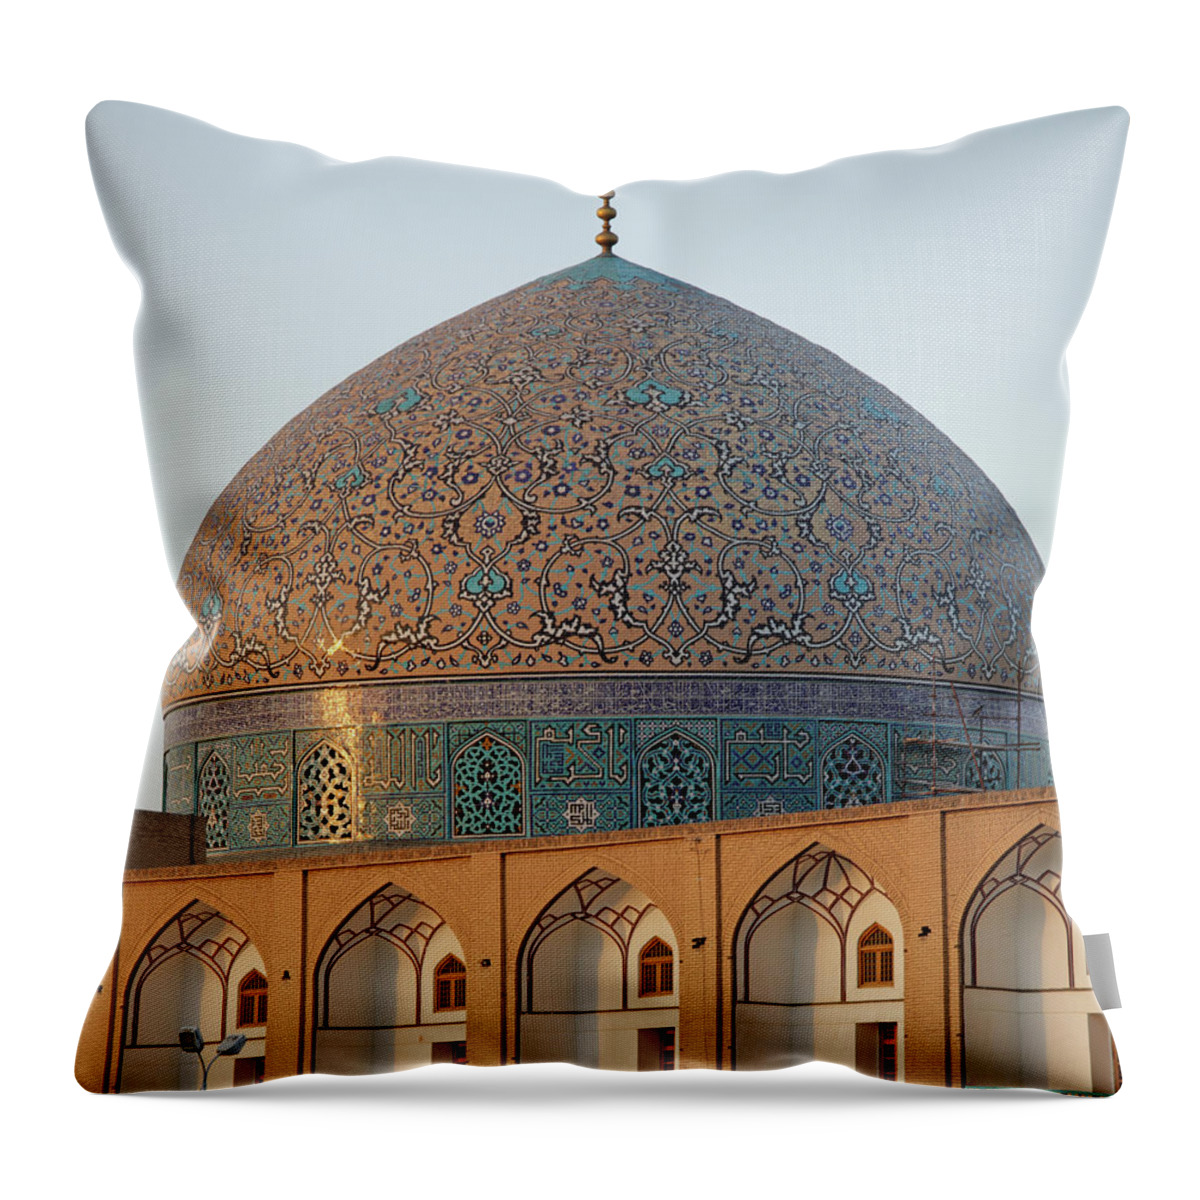 Arch Throw Pillow featuring the photograph Dome Of The Sheikh Lotf Allah Mosque In by Massimo Pizzotti